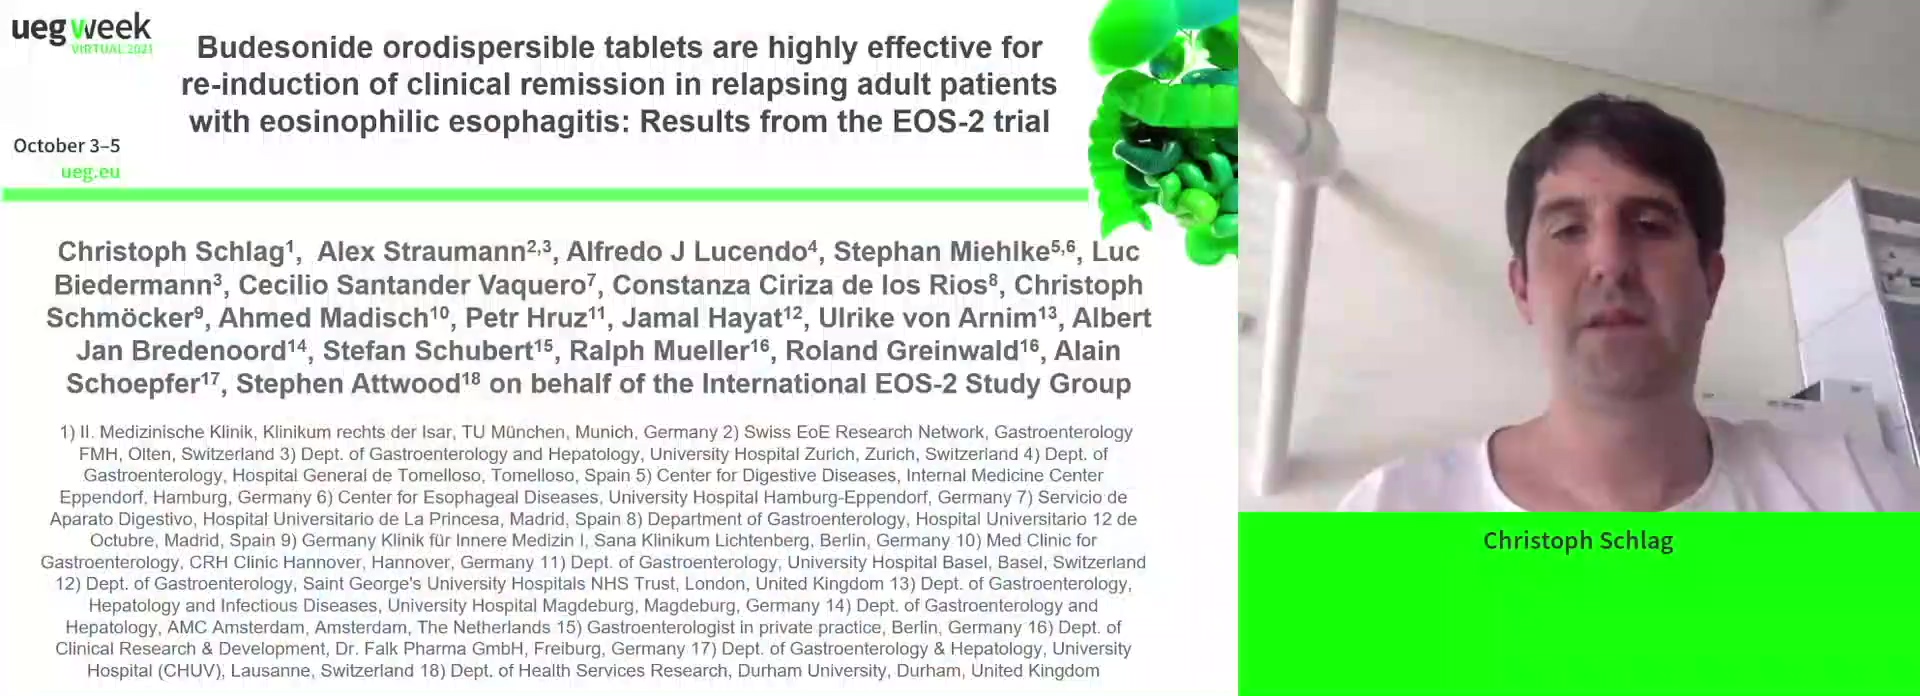 BUDESONIDE ORODISPERSIBLE TABLETS ARE HIGHLY EFFECTIVE FOR RE-INDUCTION OF CLINICAL REMISSION IN RELAPSING ADULT PATIENTS WITH EOSINOPHILIC ESOPHAGITIS: RESULTS FROM THE EOS-2 TRIAL